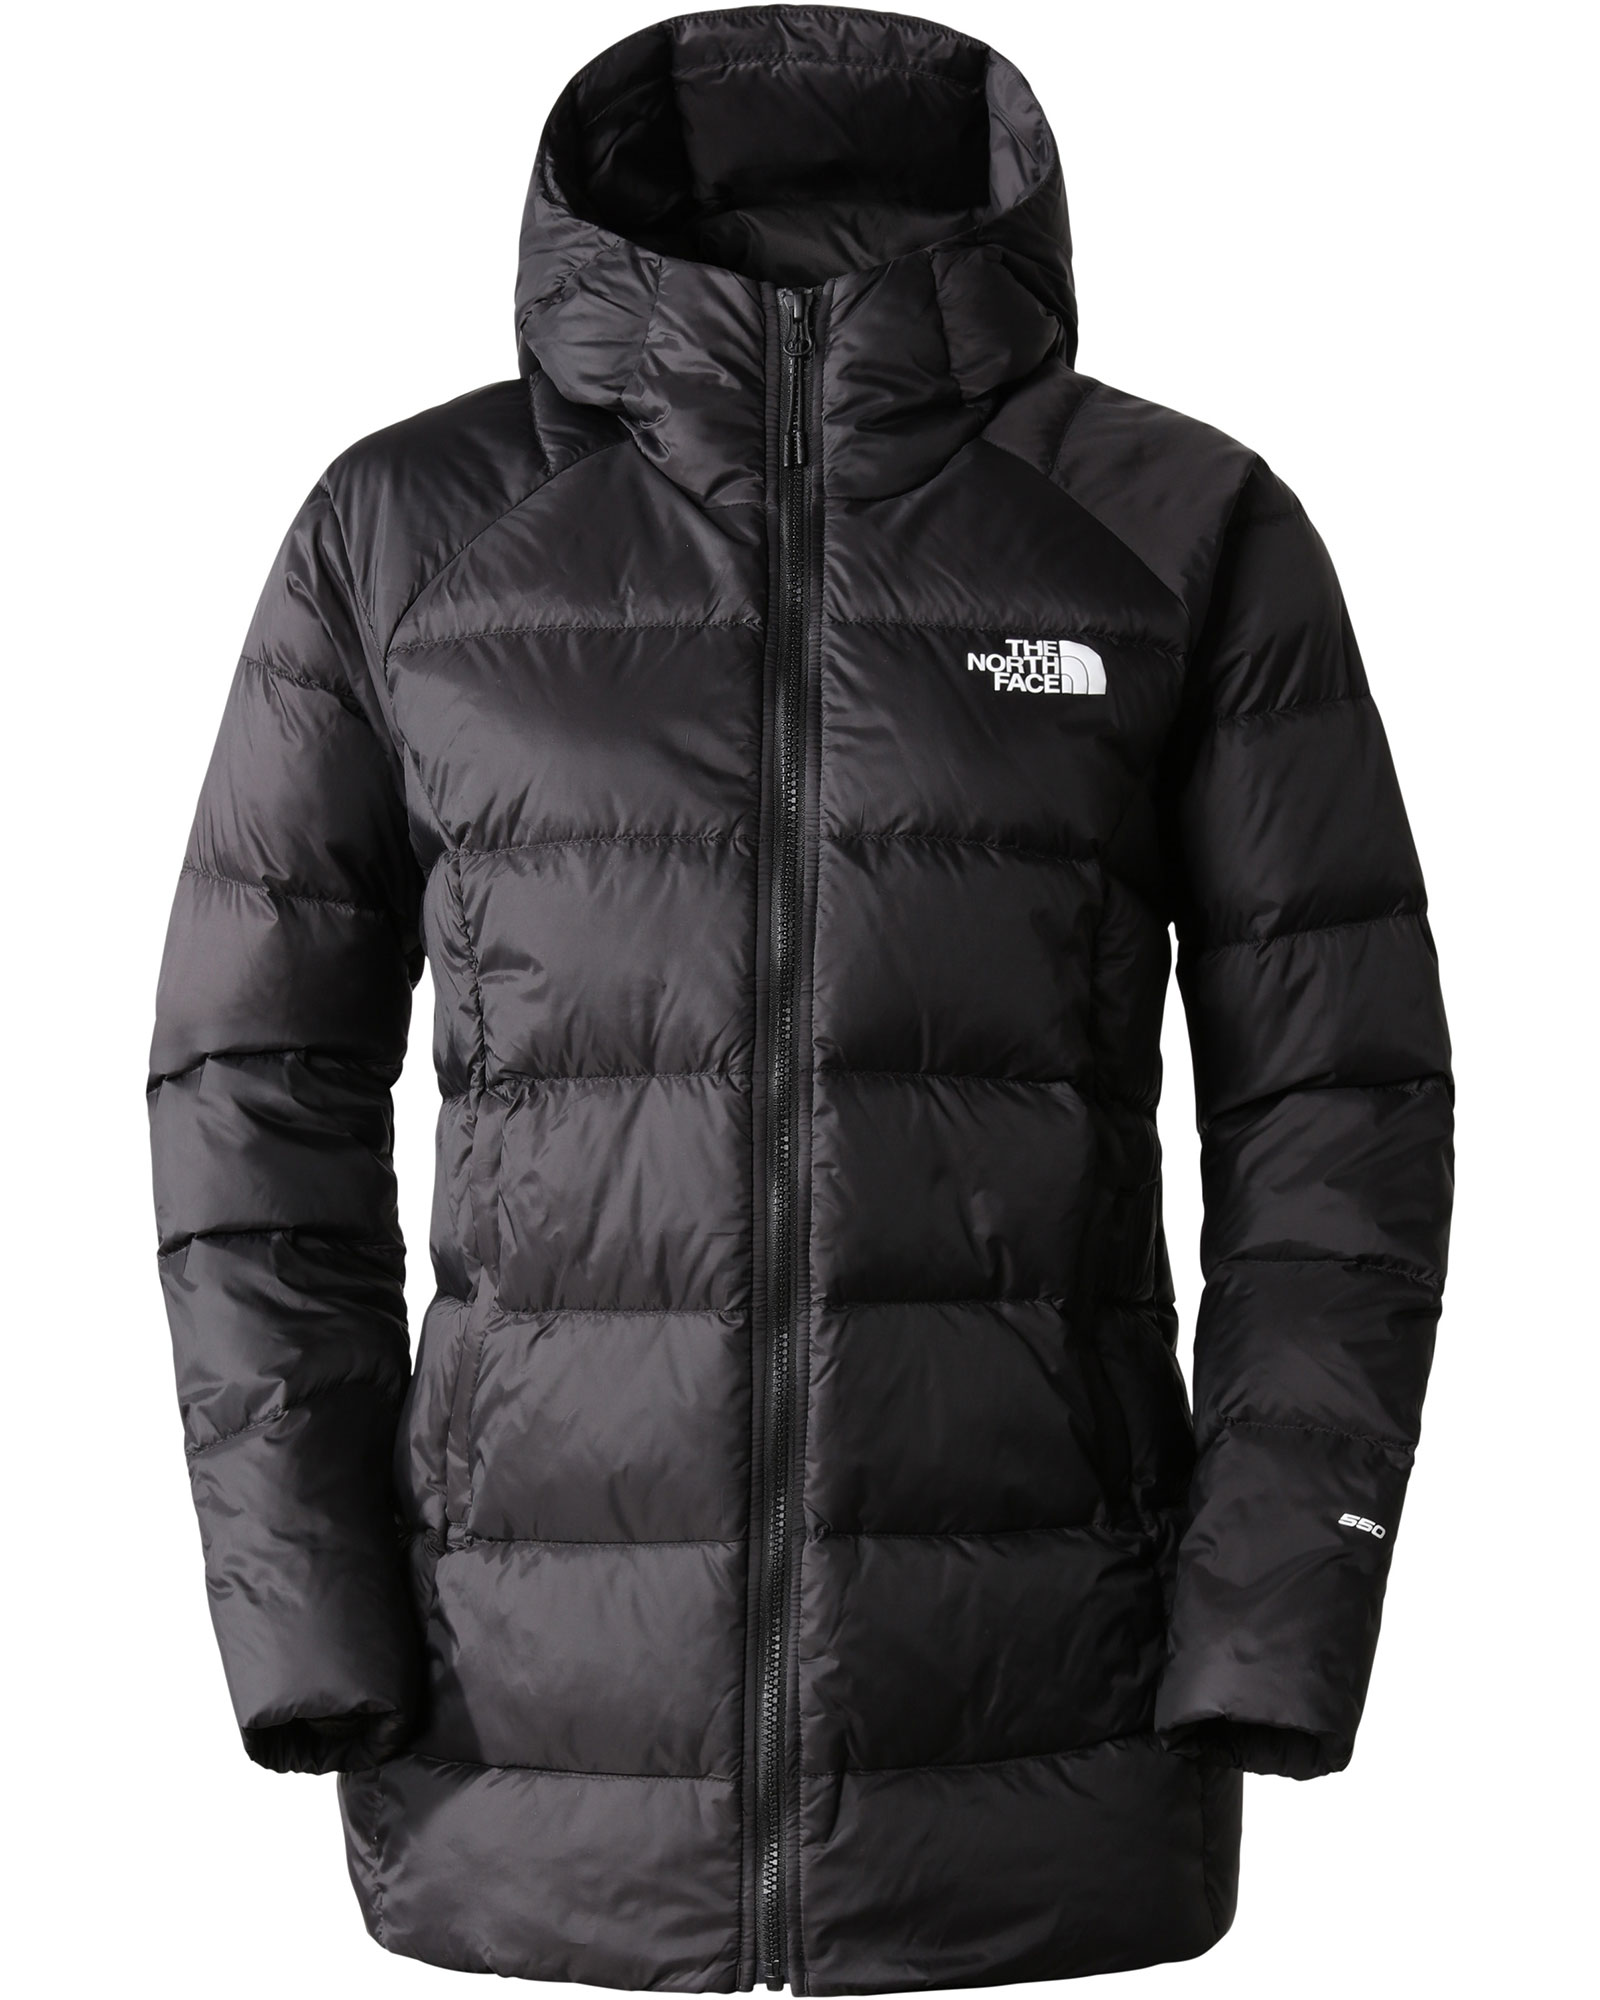 The North Face Hyalite Womens Down Parka Jacket